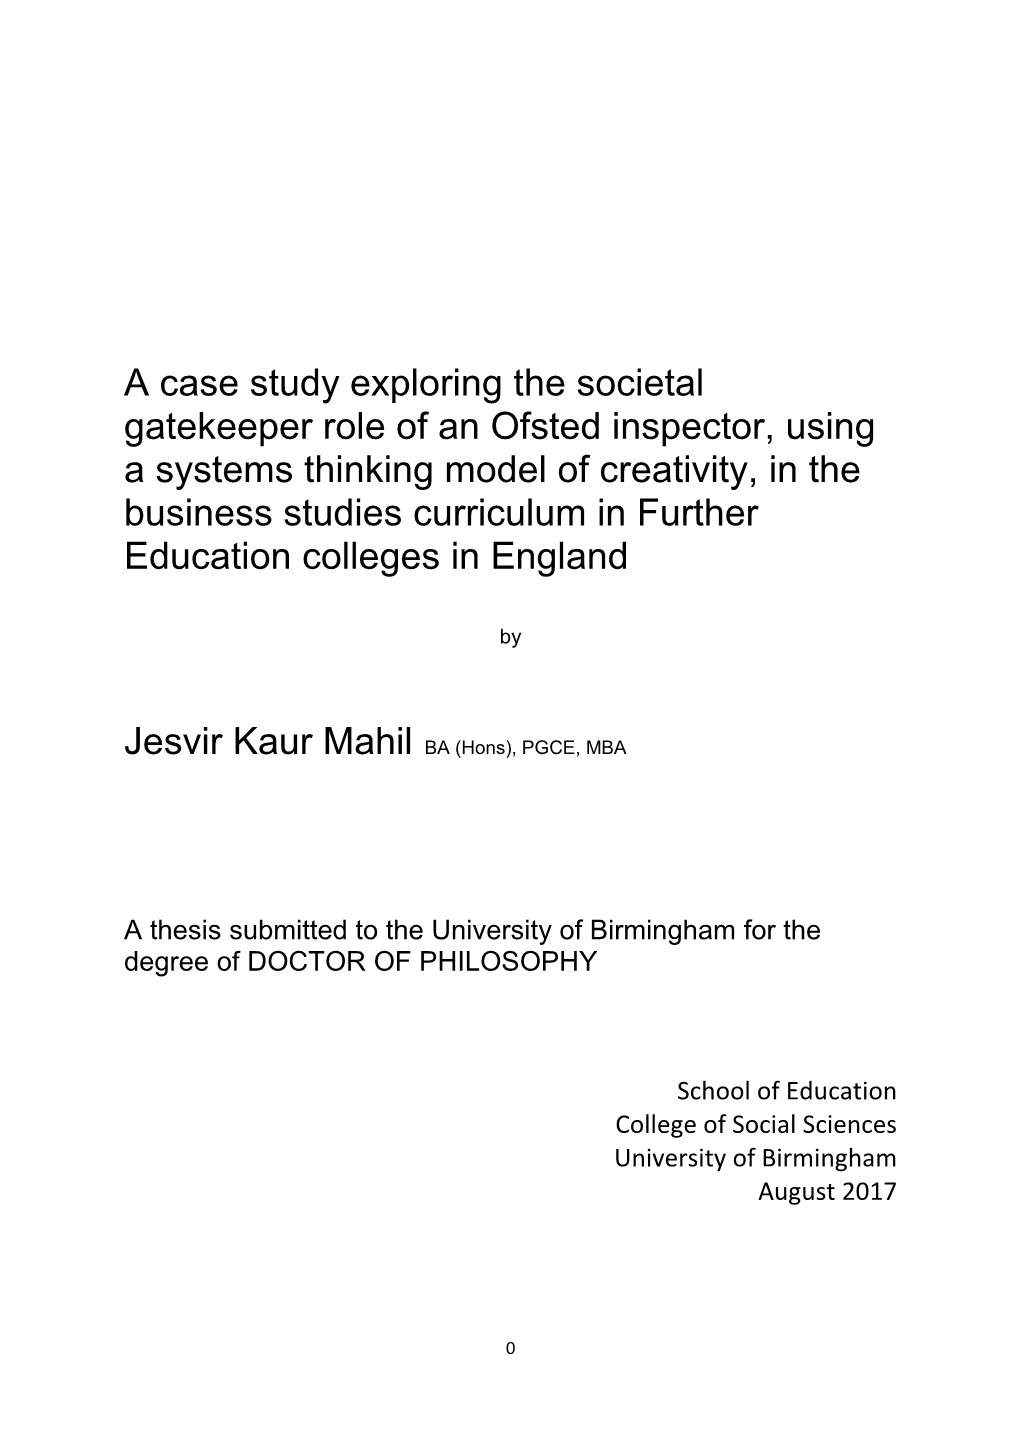 A Case Study Exploring the Societal Gatekeeper Role of an Ofsted